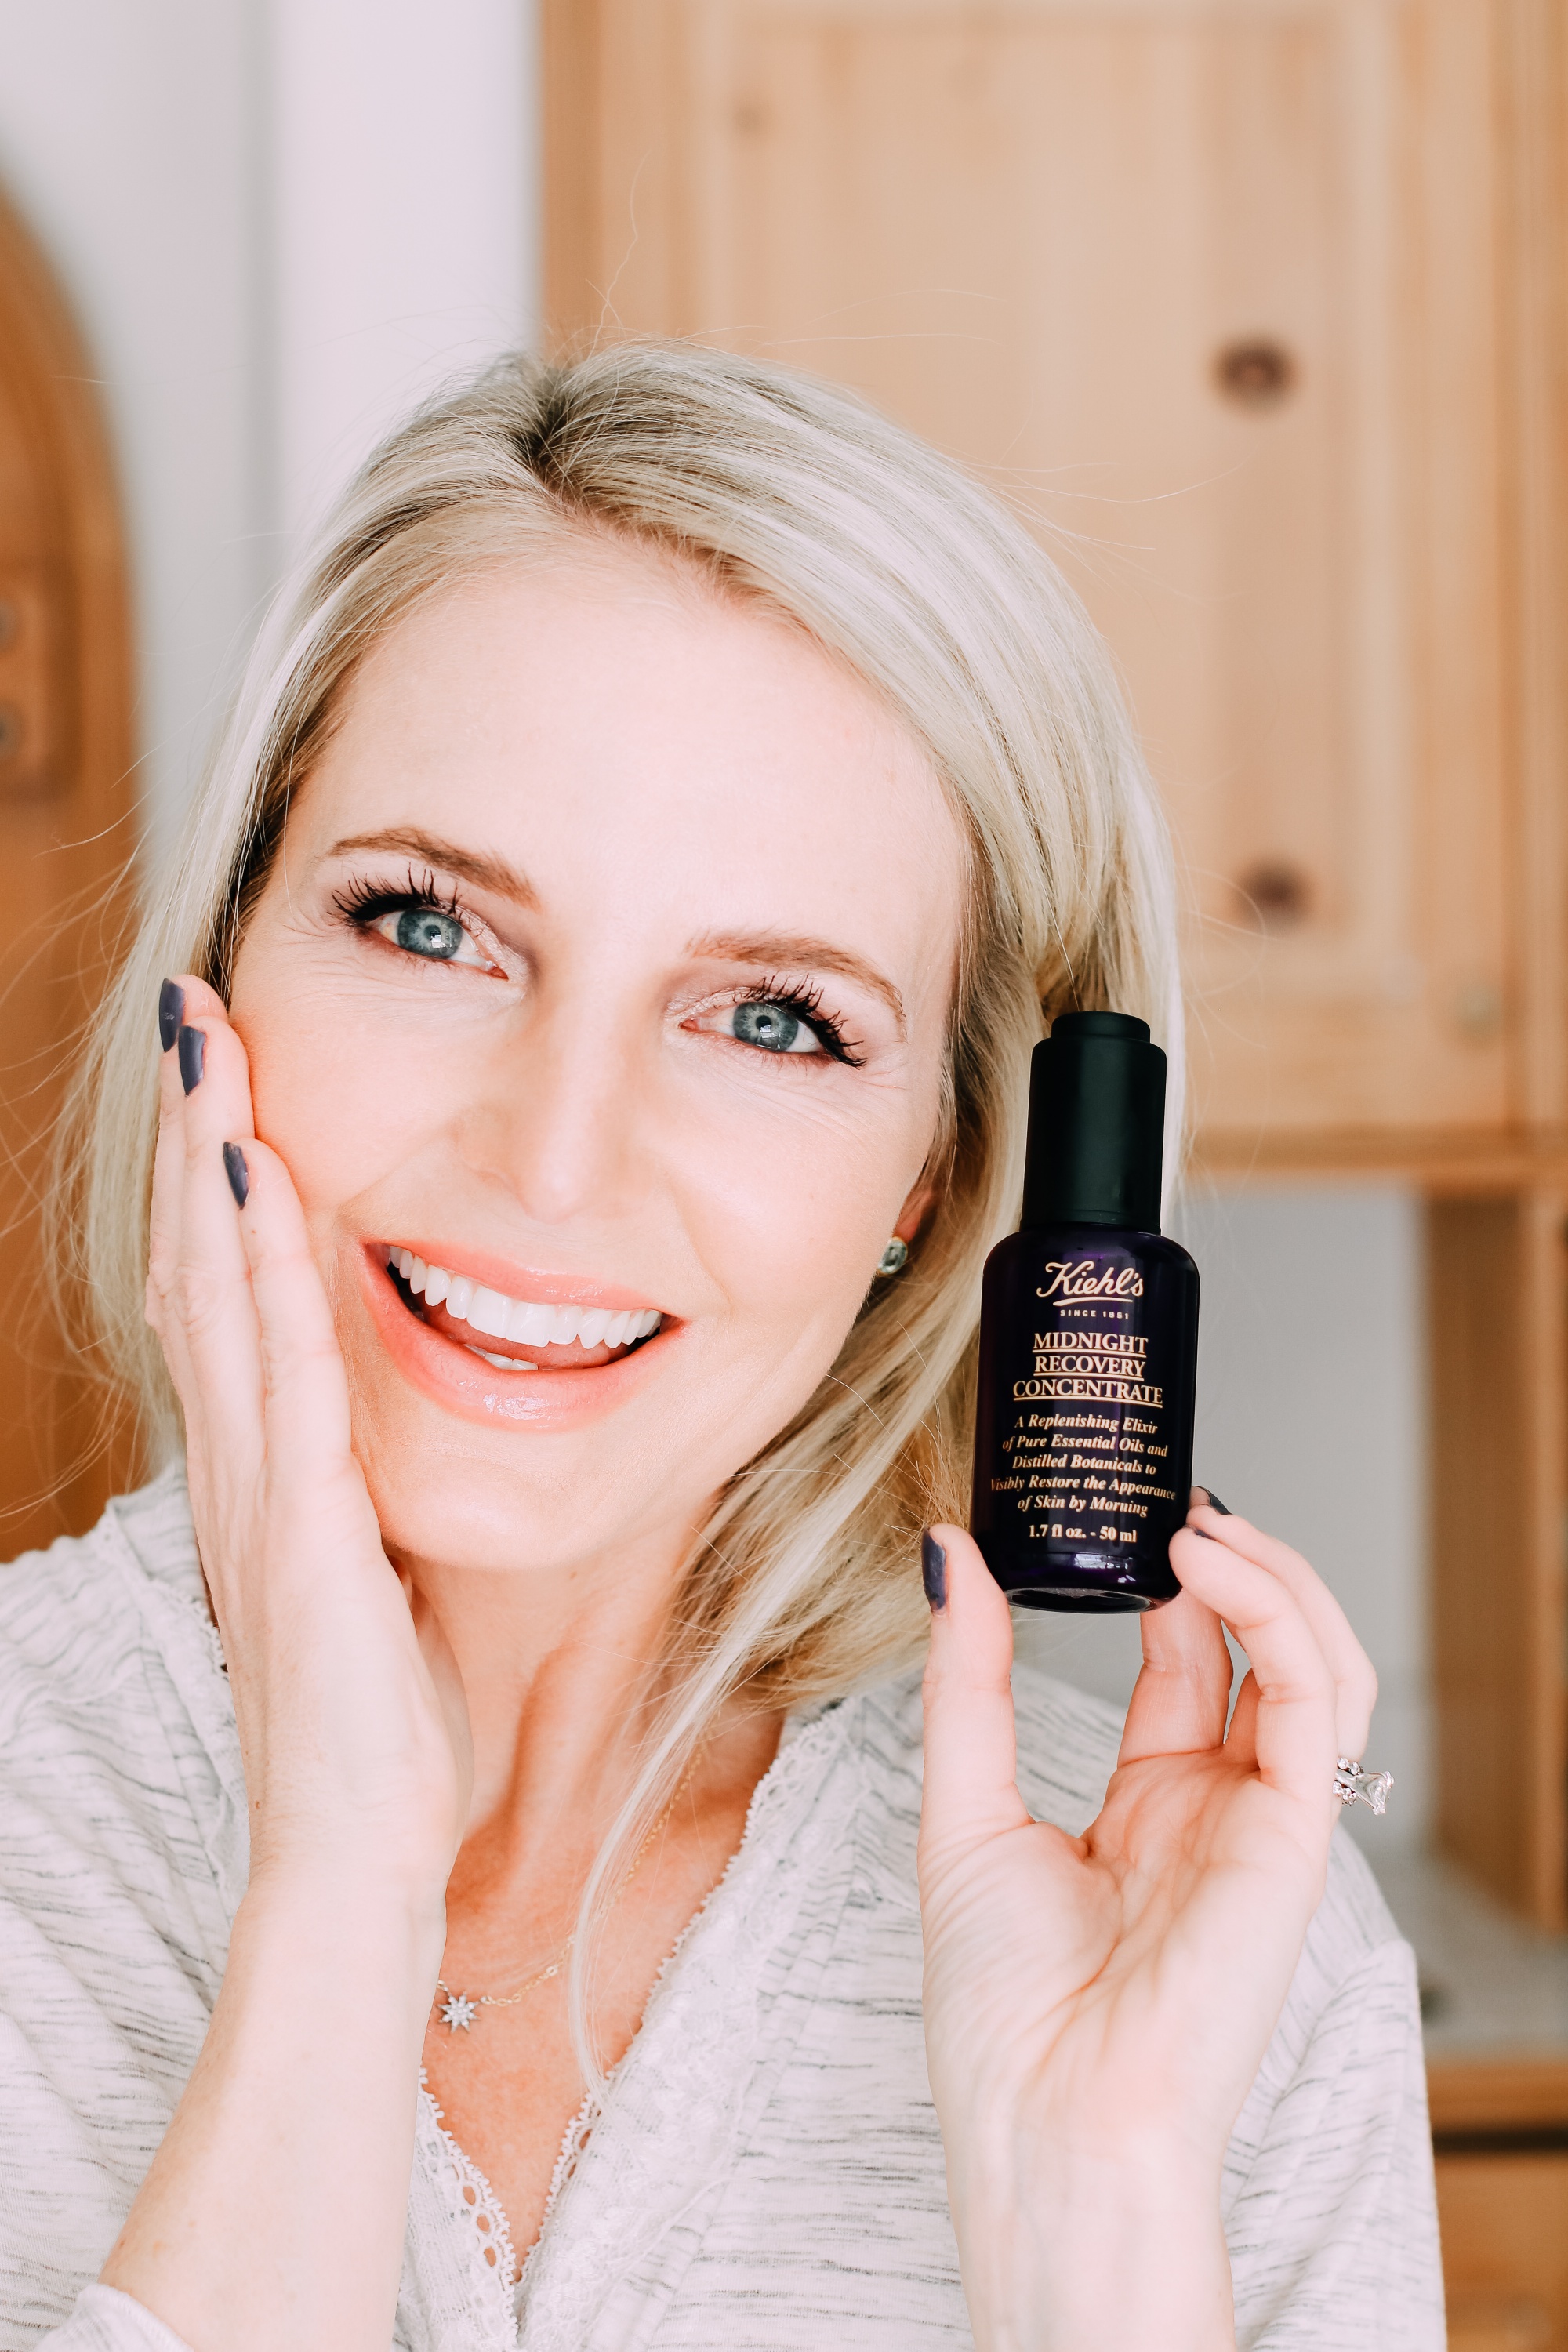 Skincare Gifts, Erin busbee of Busbee Style holding the Midnight Recovery Concentrate Face Oil by Kiehl's from Nordstrom wearing a gray robe in Telluride, Colorado